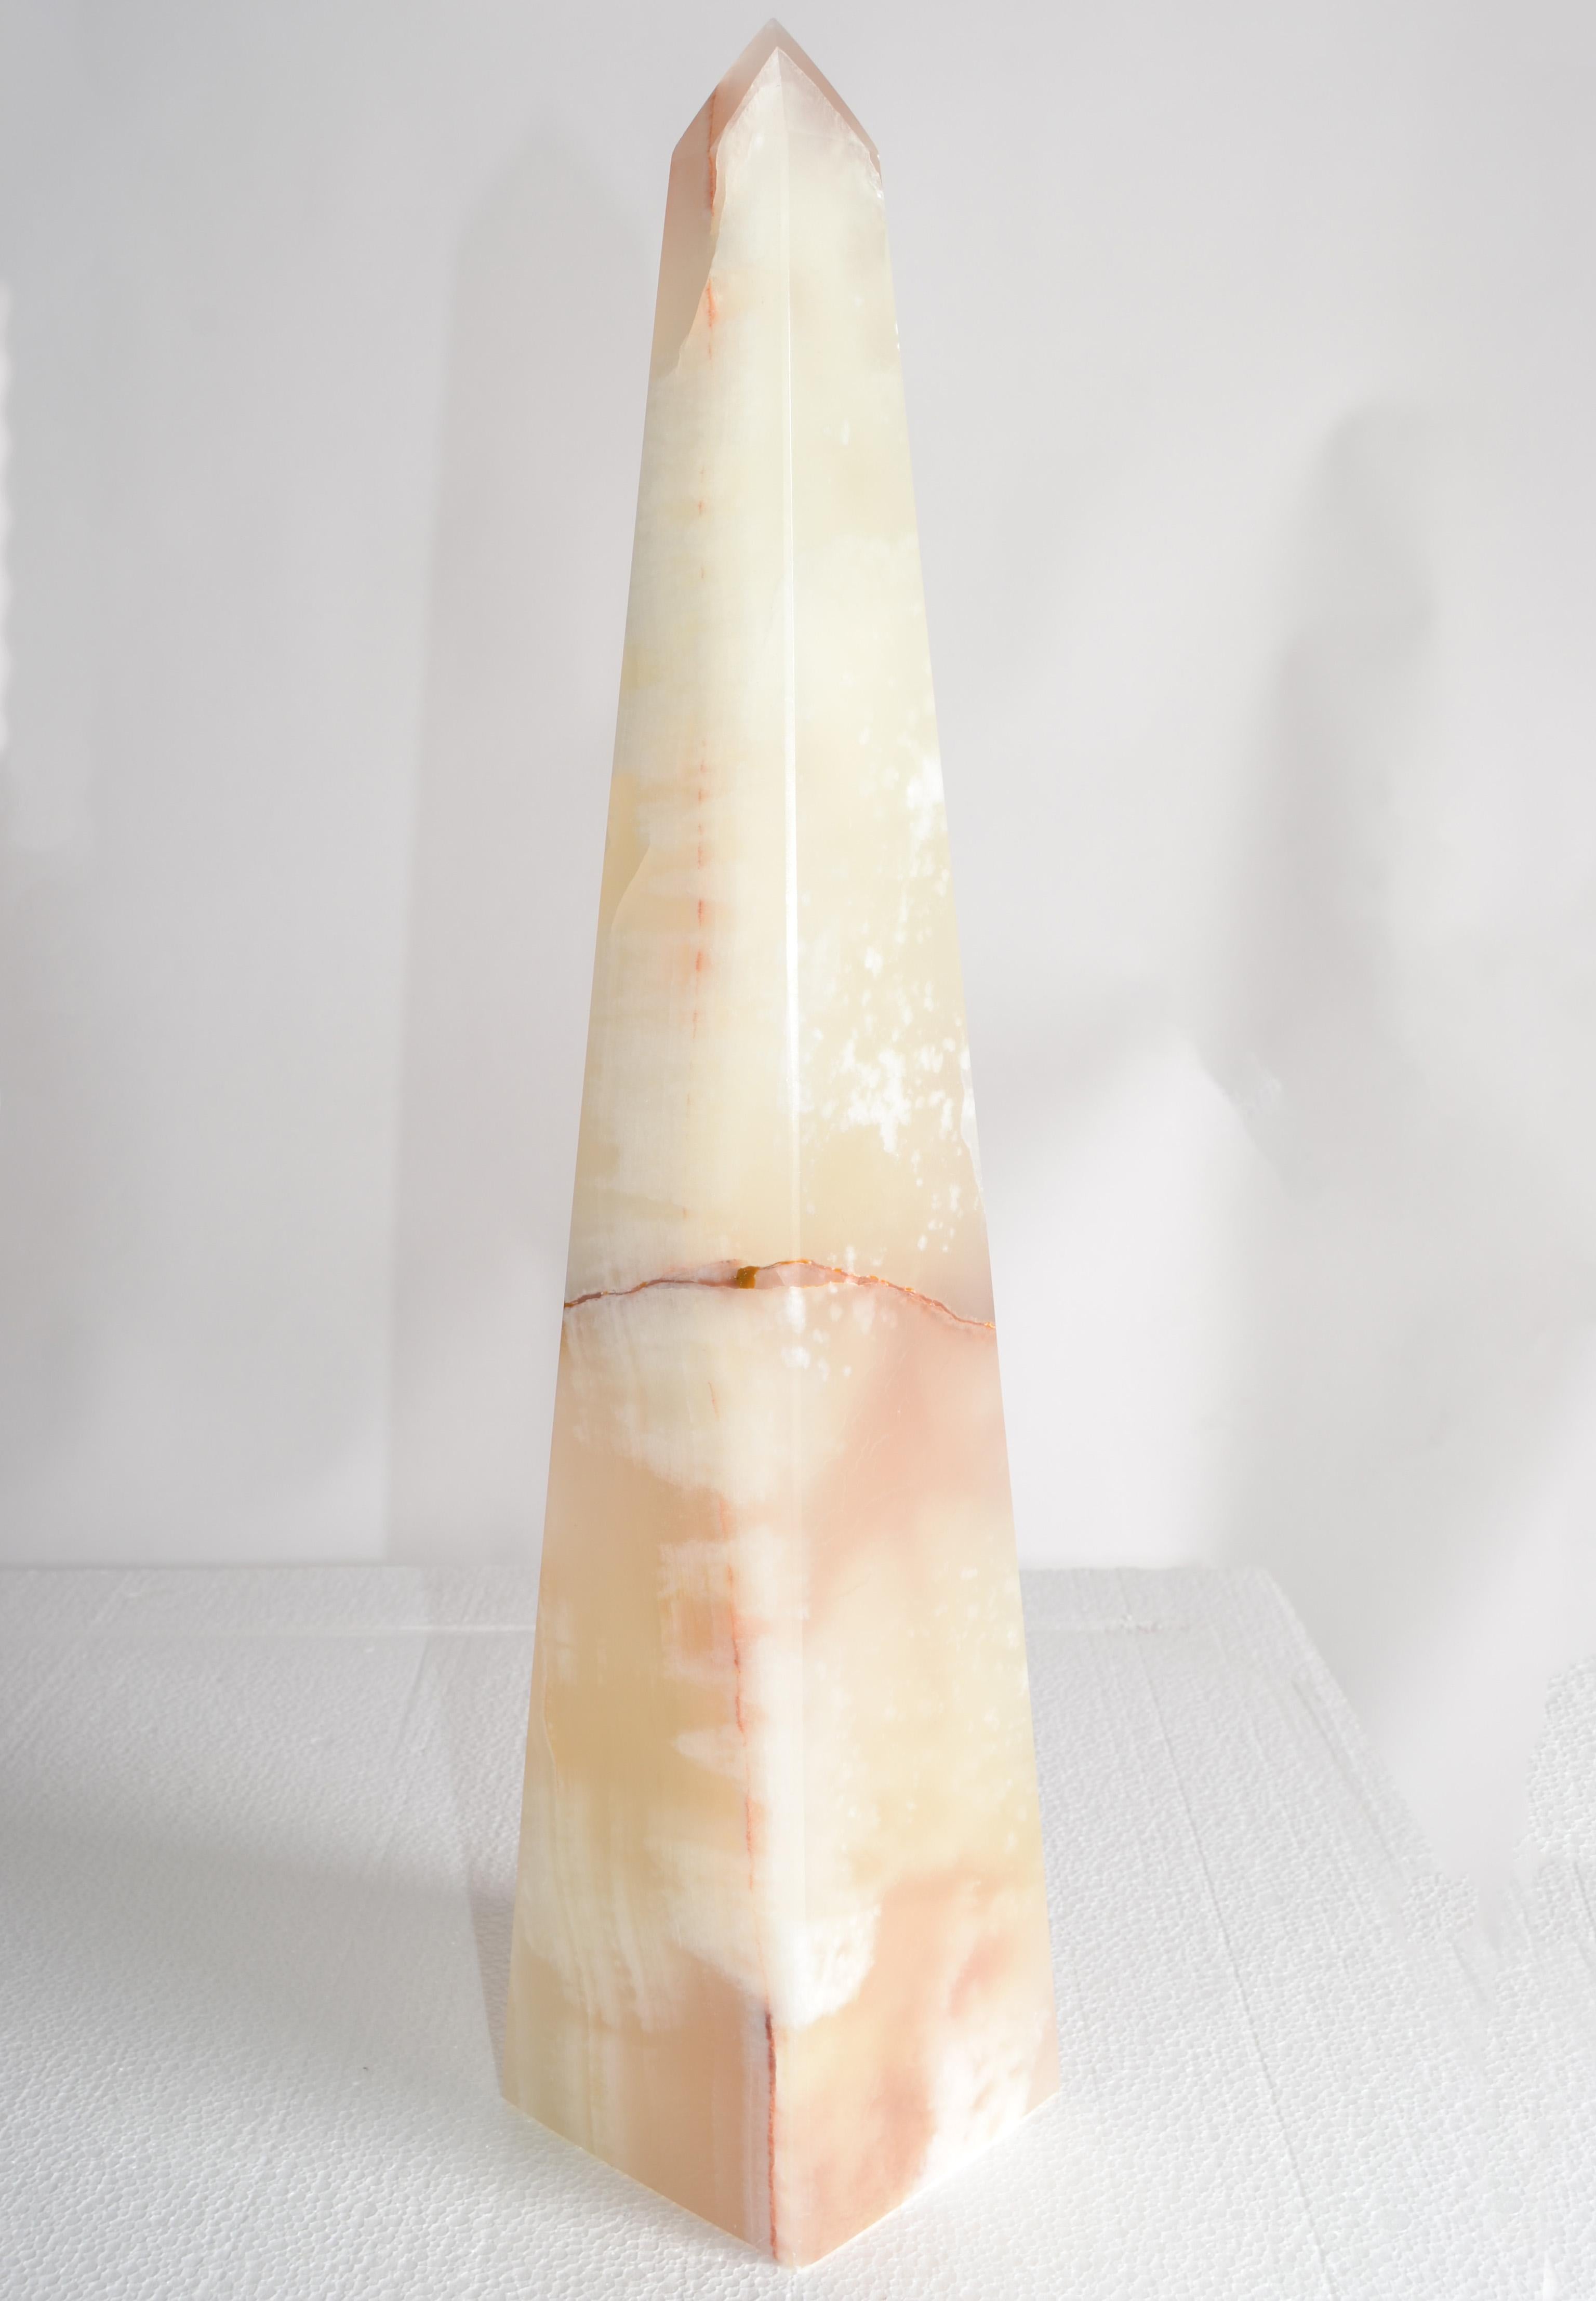 This is a tall vibrant Onyx Obelisks or Bookend with natural details and sleek splendor lines. Attributed to Raymor and made in Italy circa late 1970s.
Note the natural banded patterns of this Obelisks.
Add a geometric Onyx Stone Obelisk to your